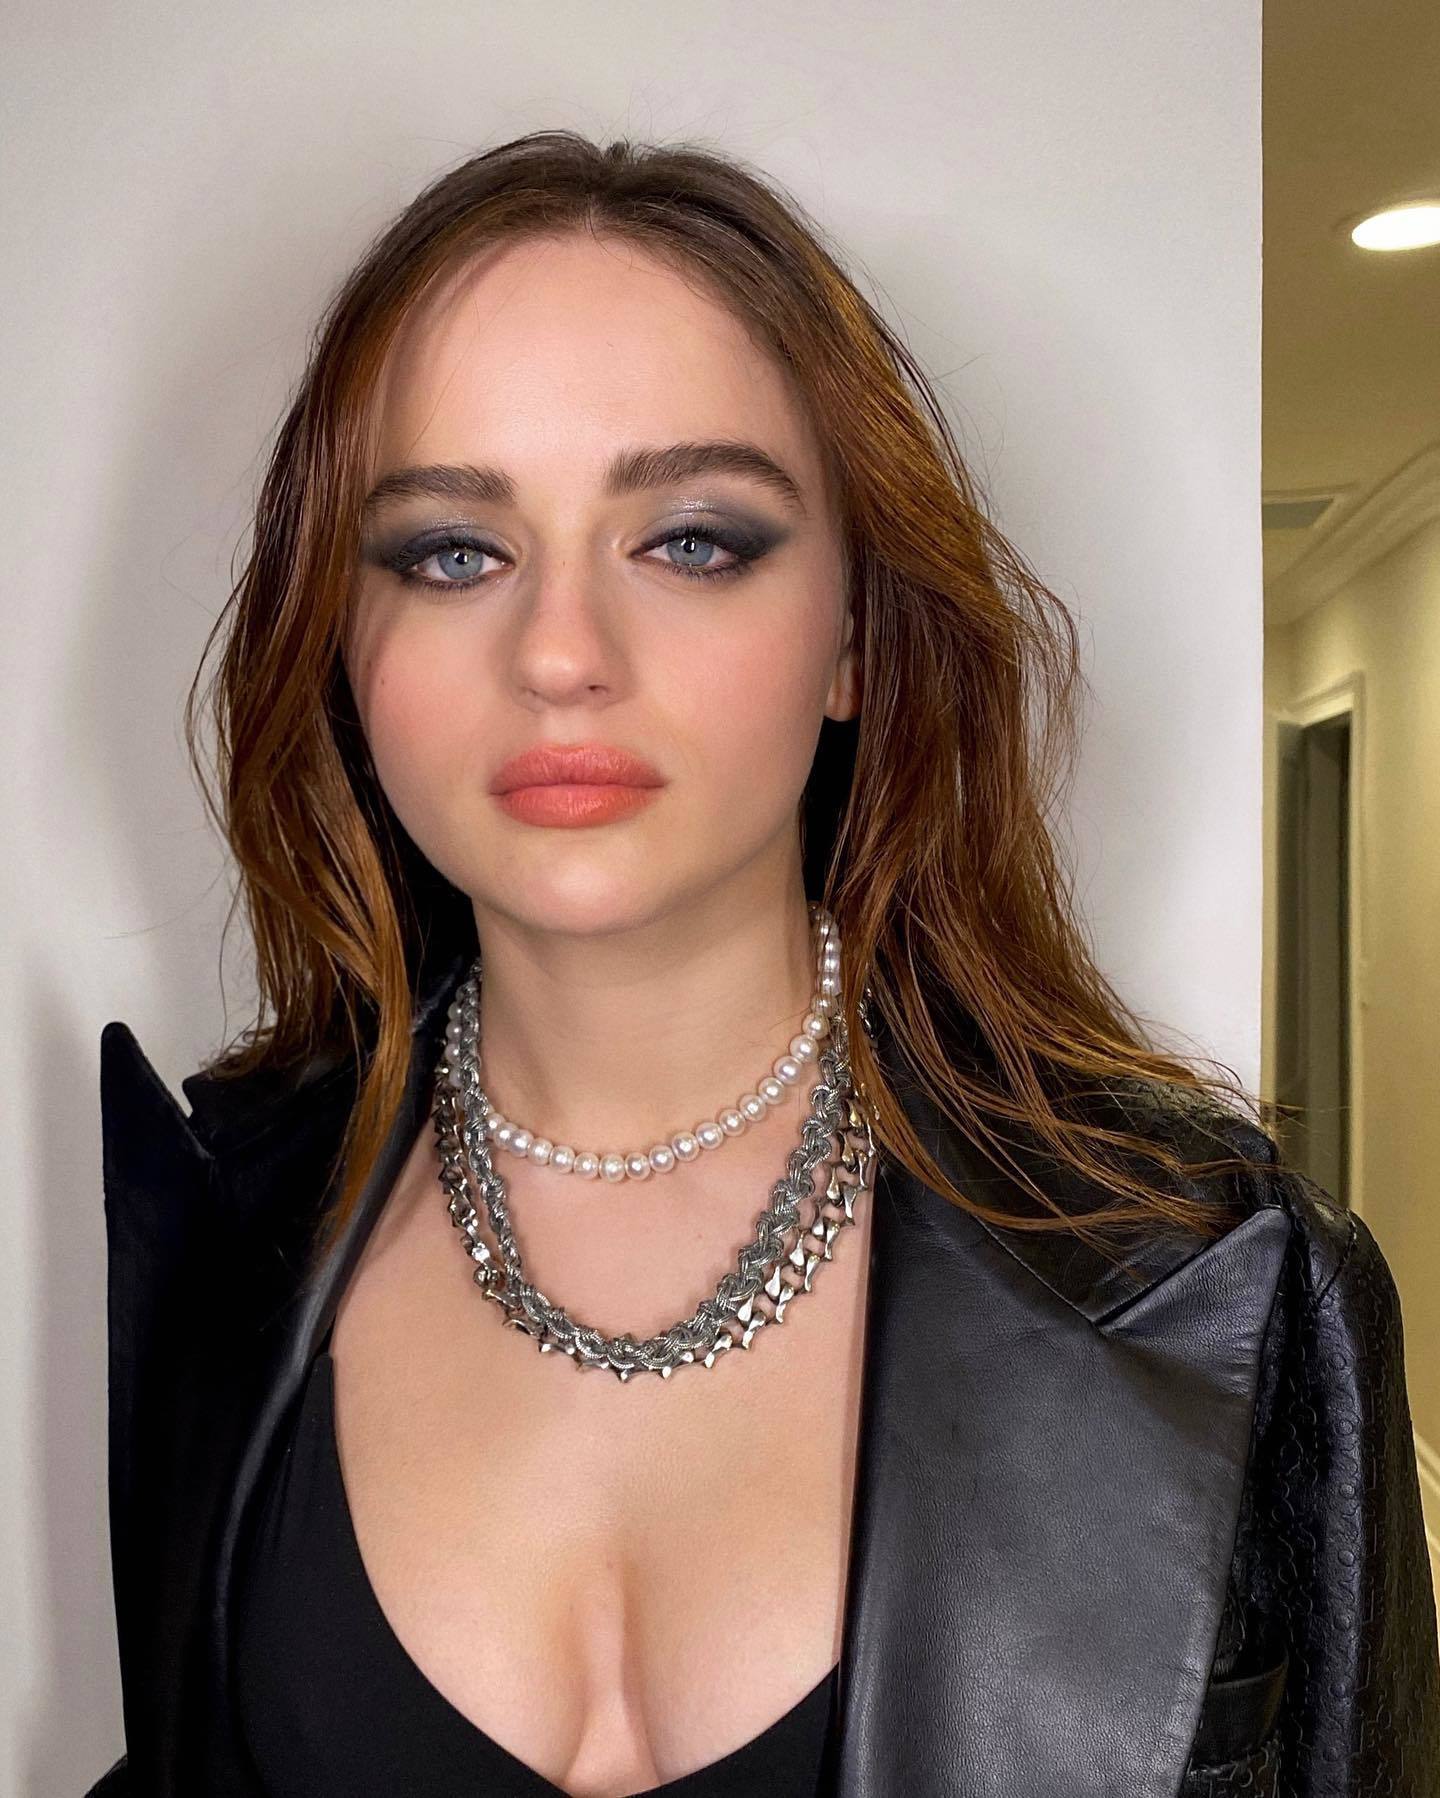 Badass Babe Joey King Showing Her Abs and Cleavage in a Hot Gallery